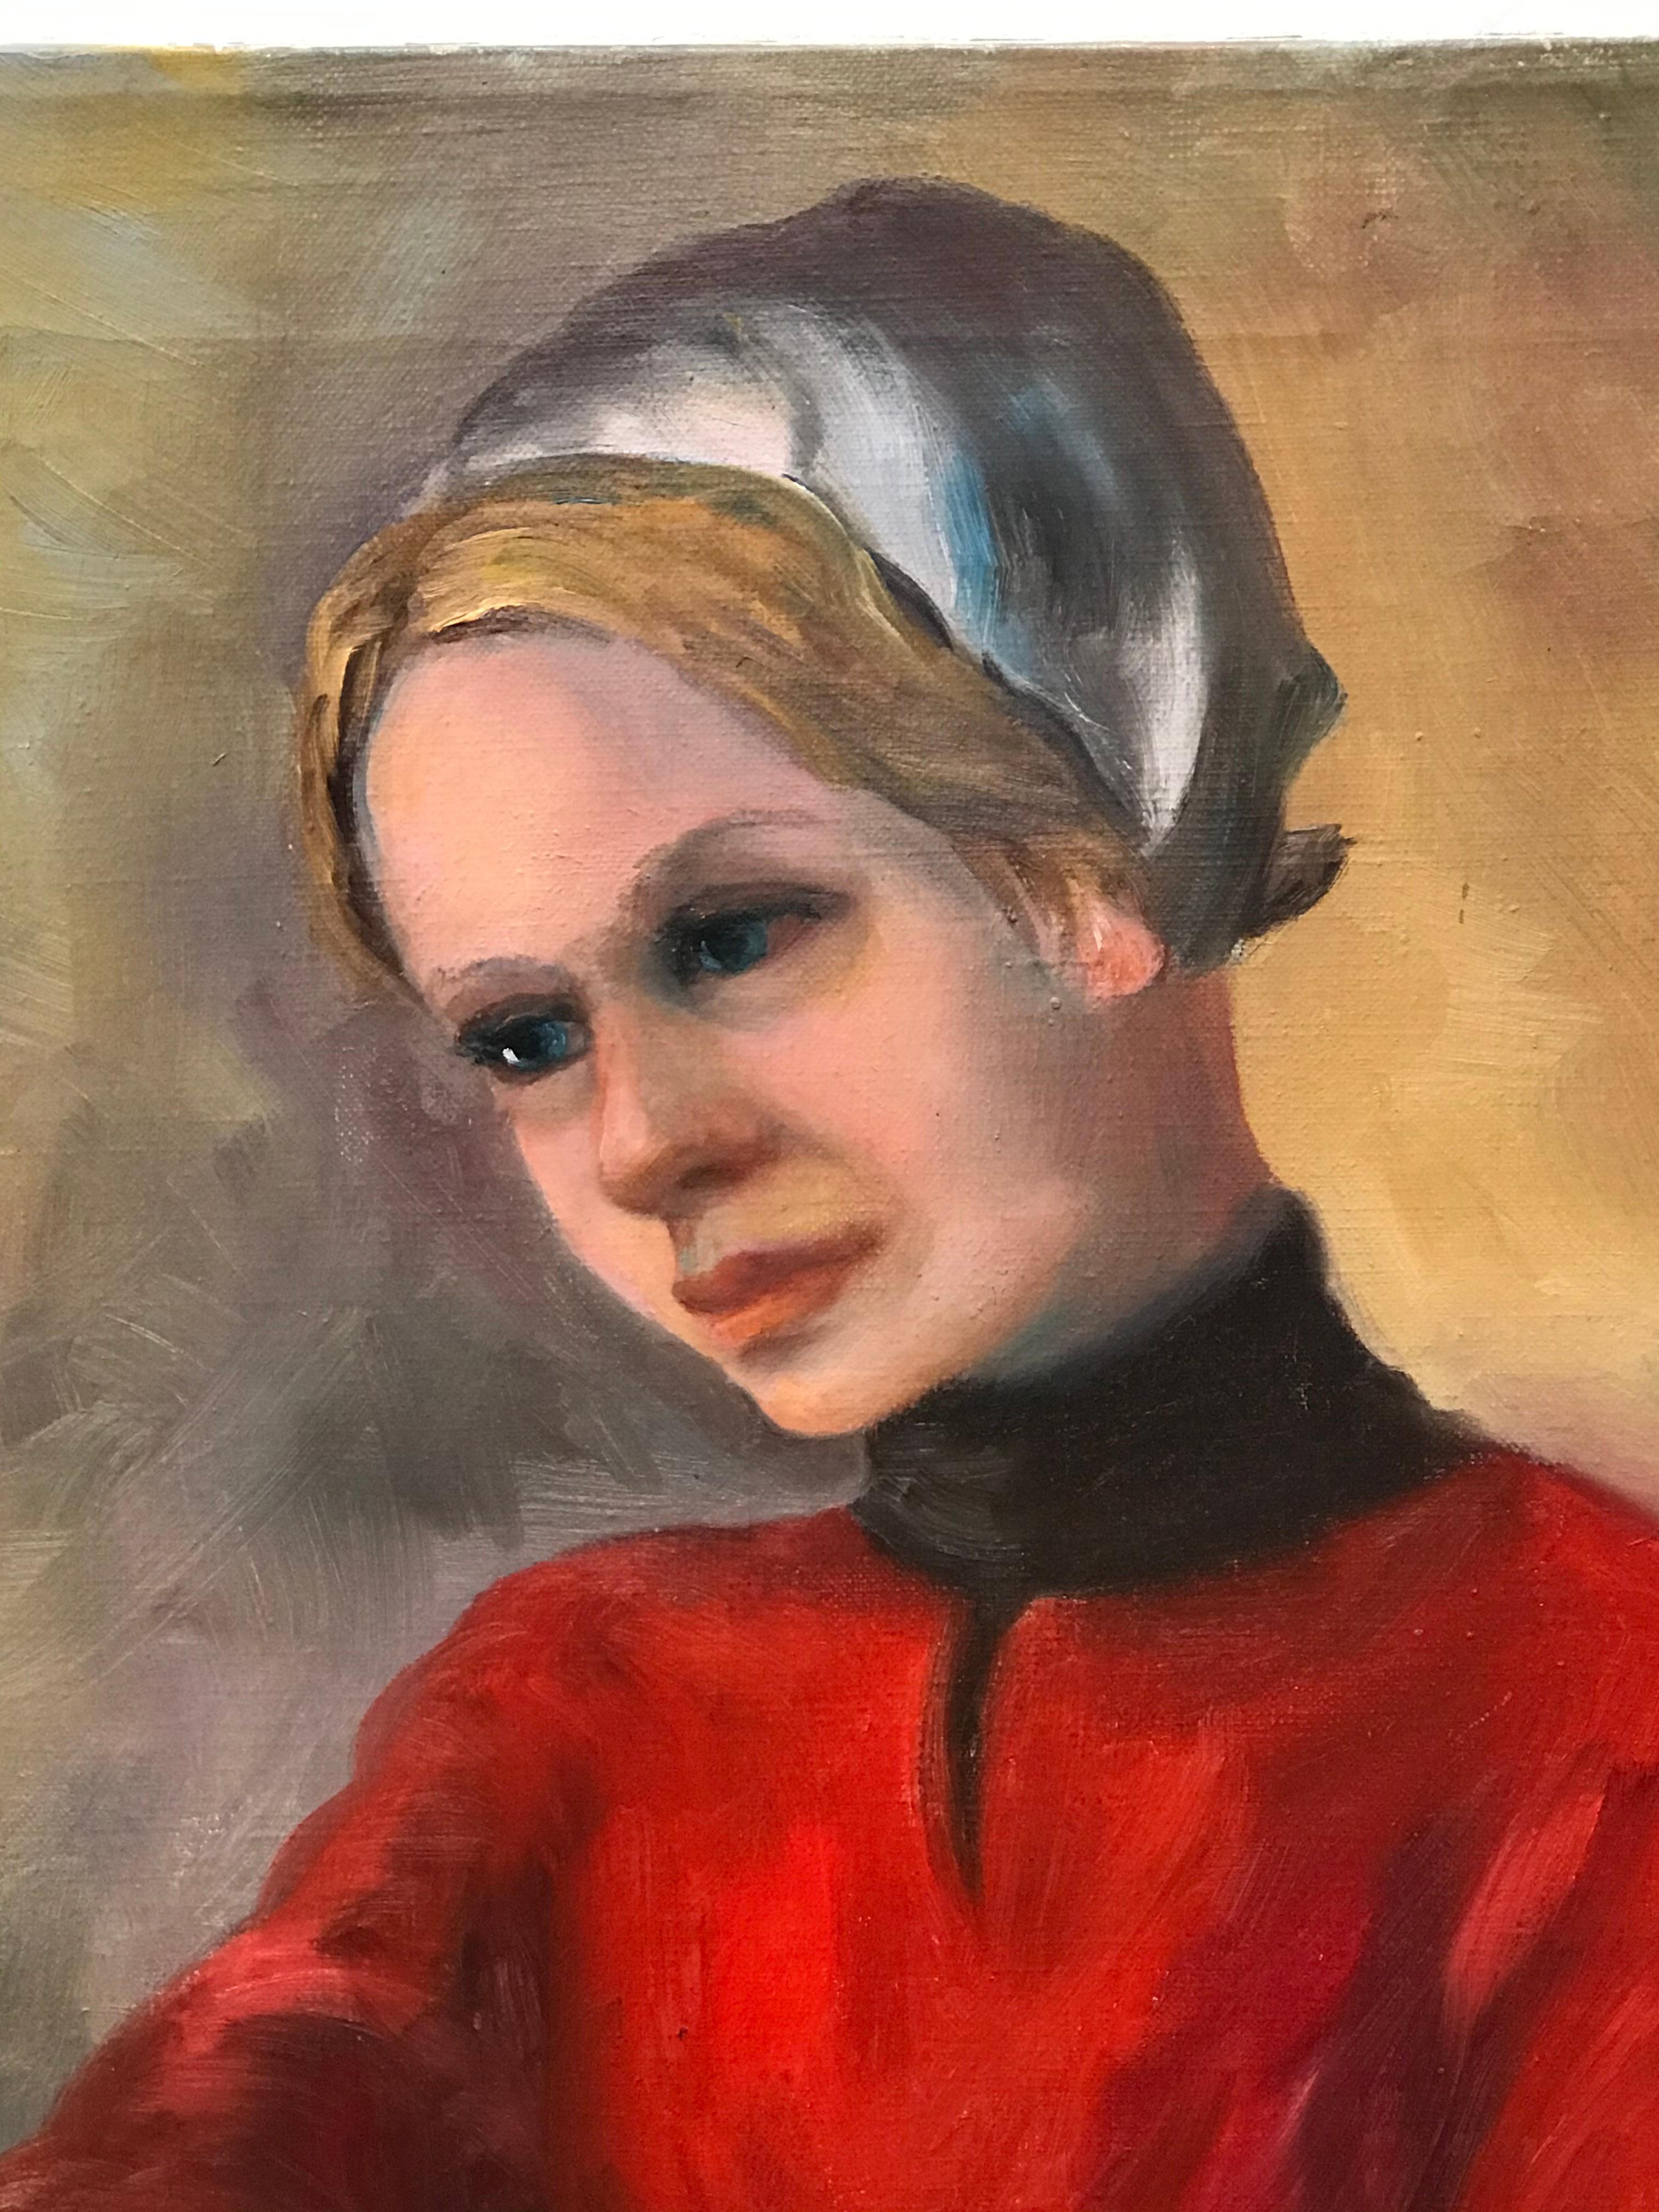 This portrait features a blonde lady in a red dress wearing a white beanie. The artwork is an oil painting by an unknown artist. The subject's expression conveys a sense of melancholy coupled with some bleakness. The artist gave the woman emotional